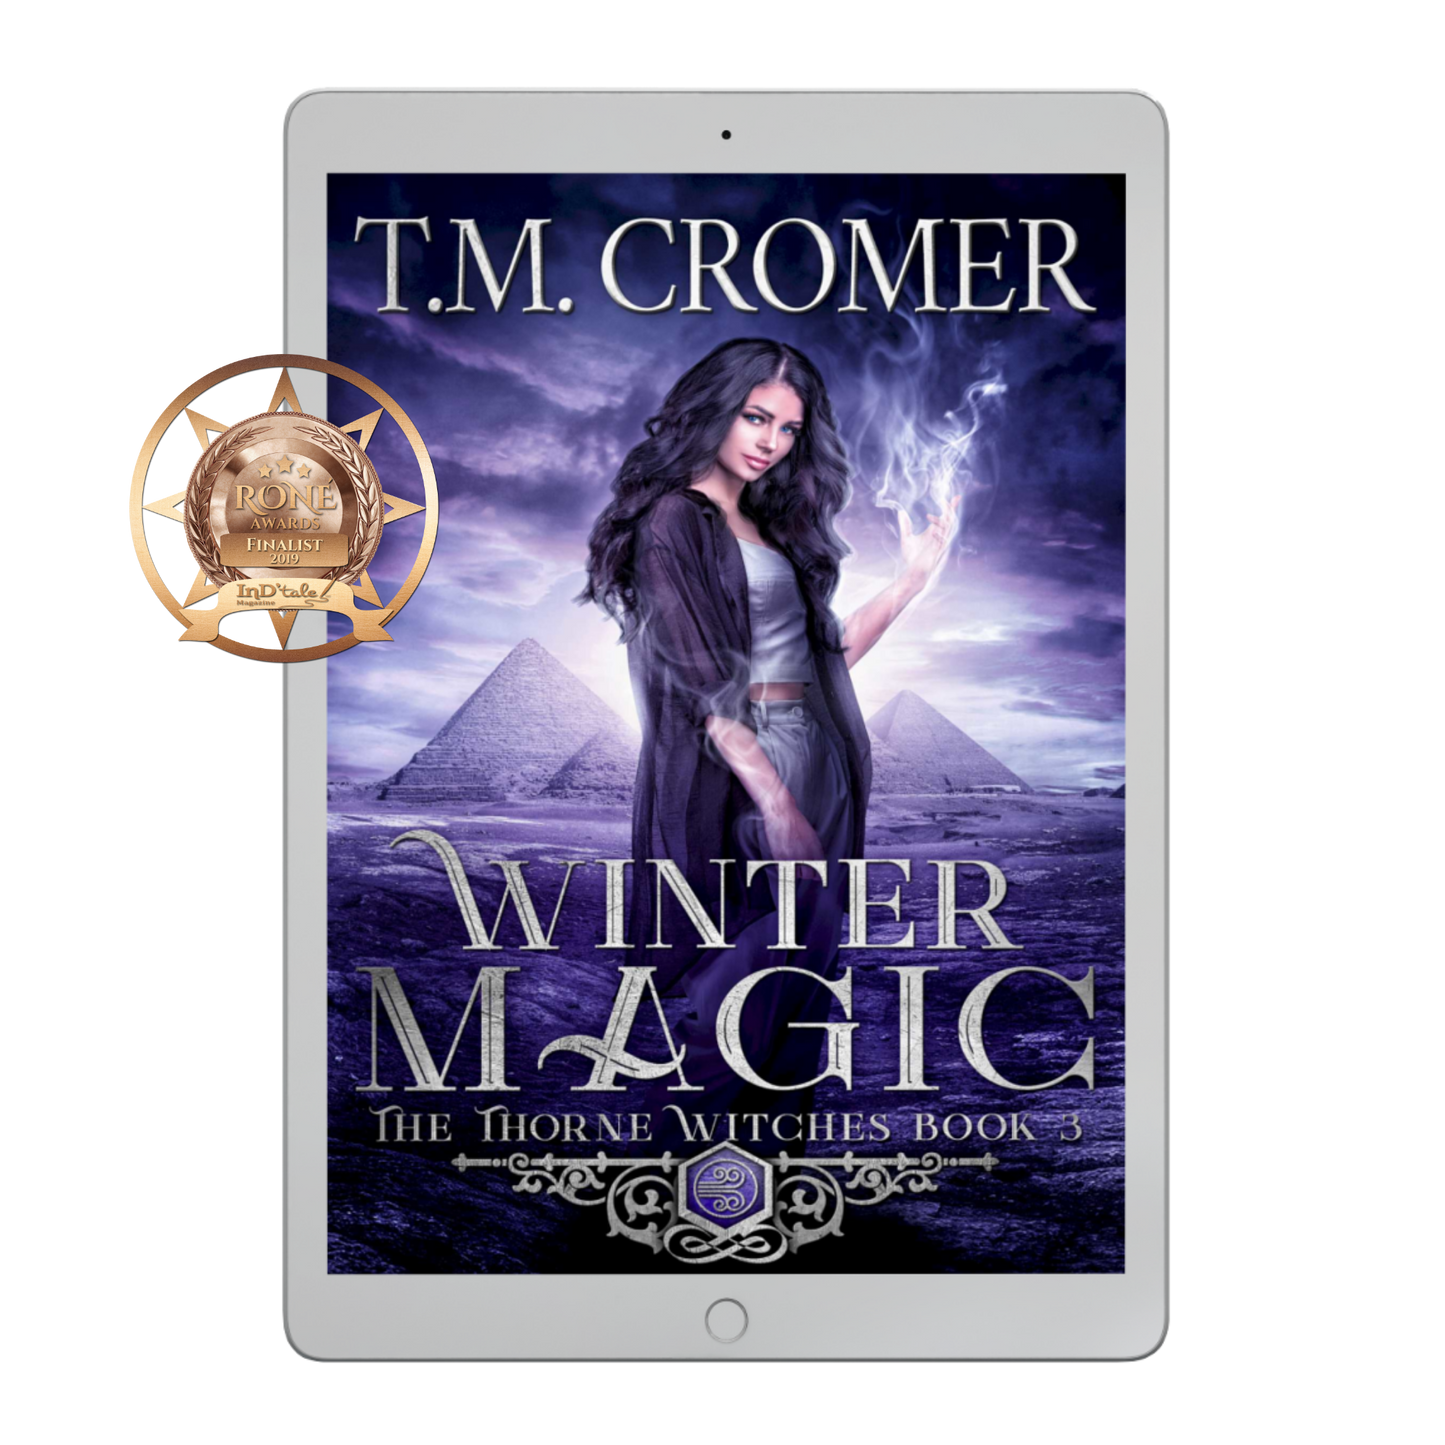 Winter Magic Ebook The Thorne Witches #3 Paranormal Romance, Urban Fantasy, Magical Realism